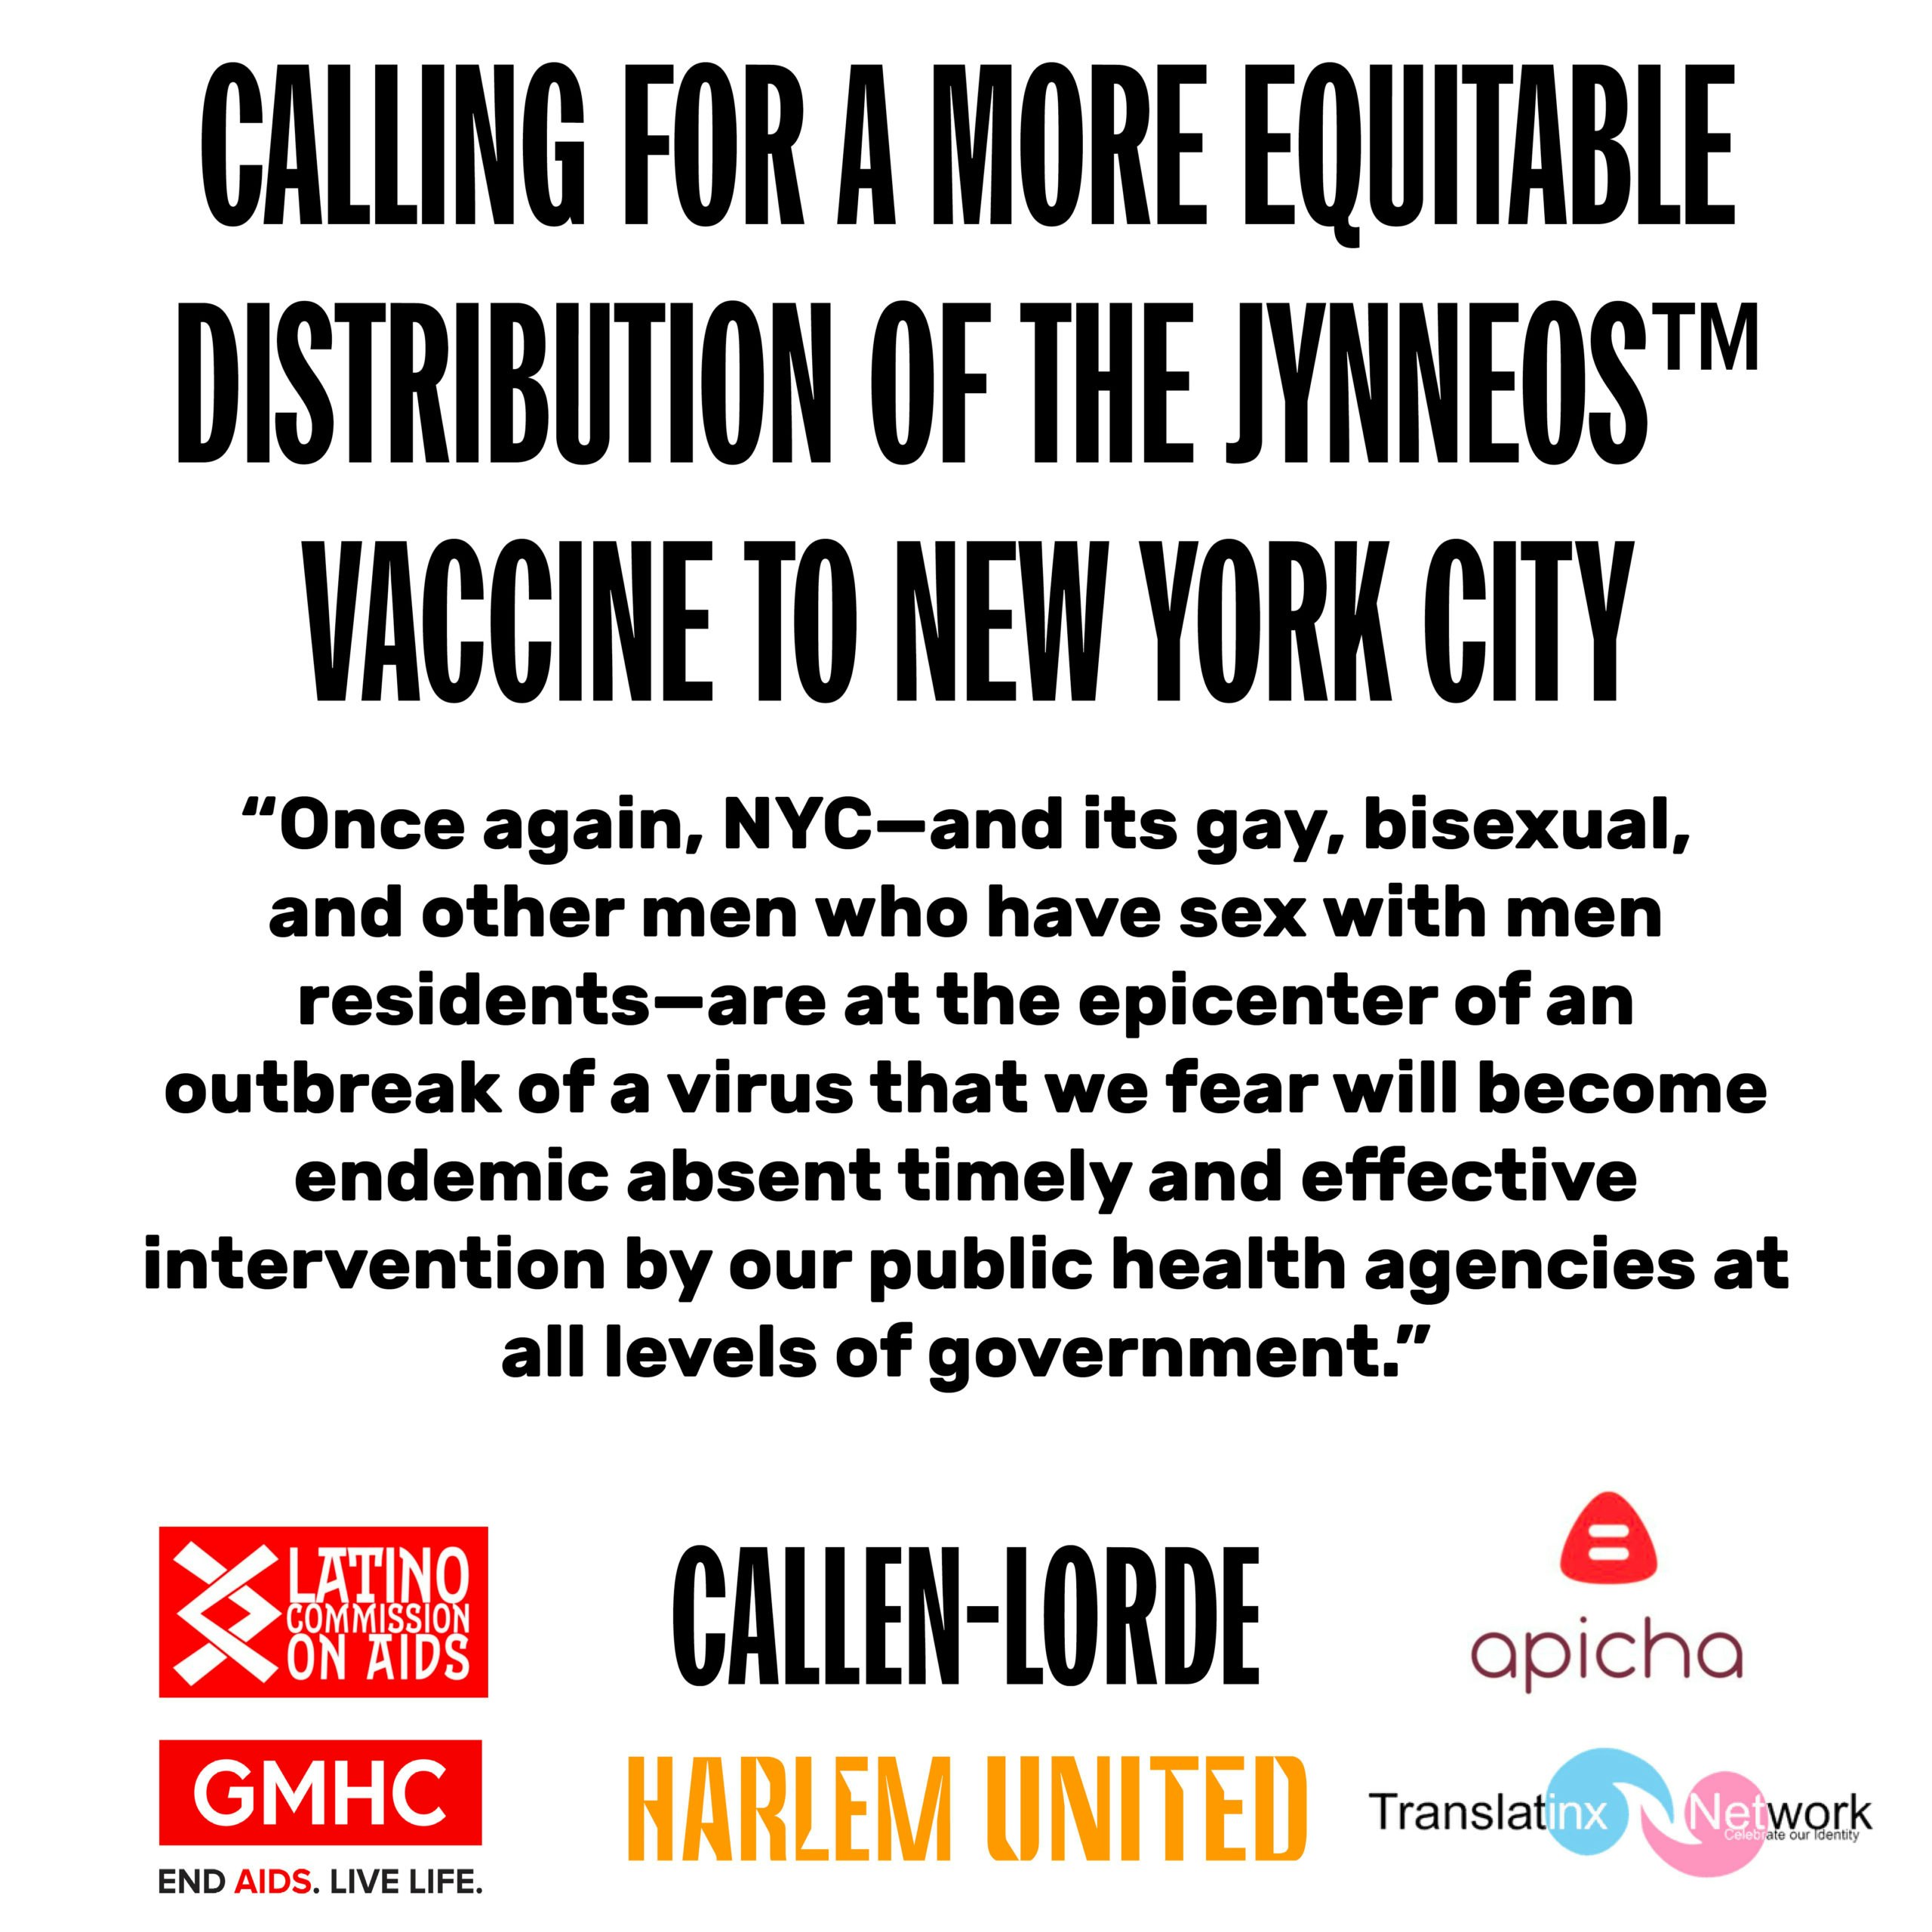 NYC Community-Based Organizations Calling for a More Equitable Distribution of Monkeypox Vaccine